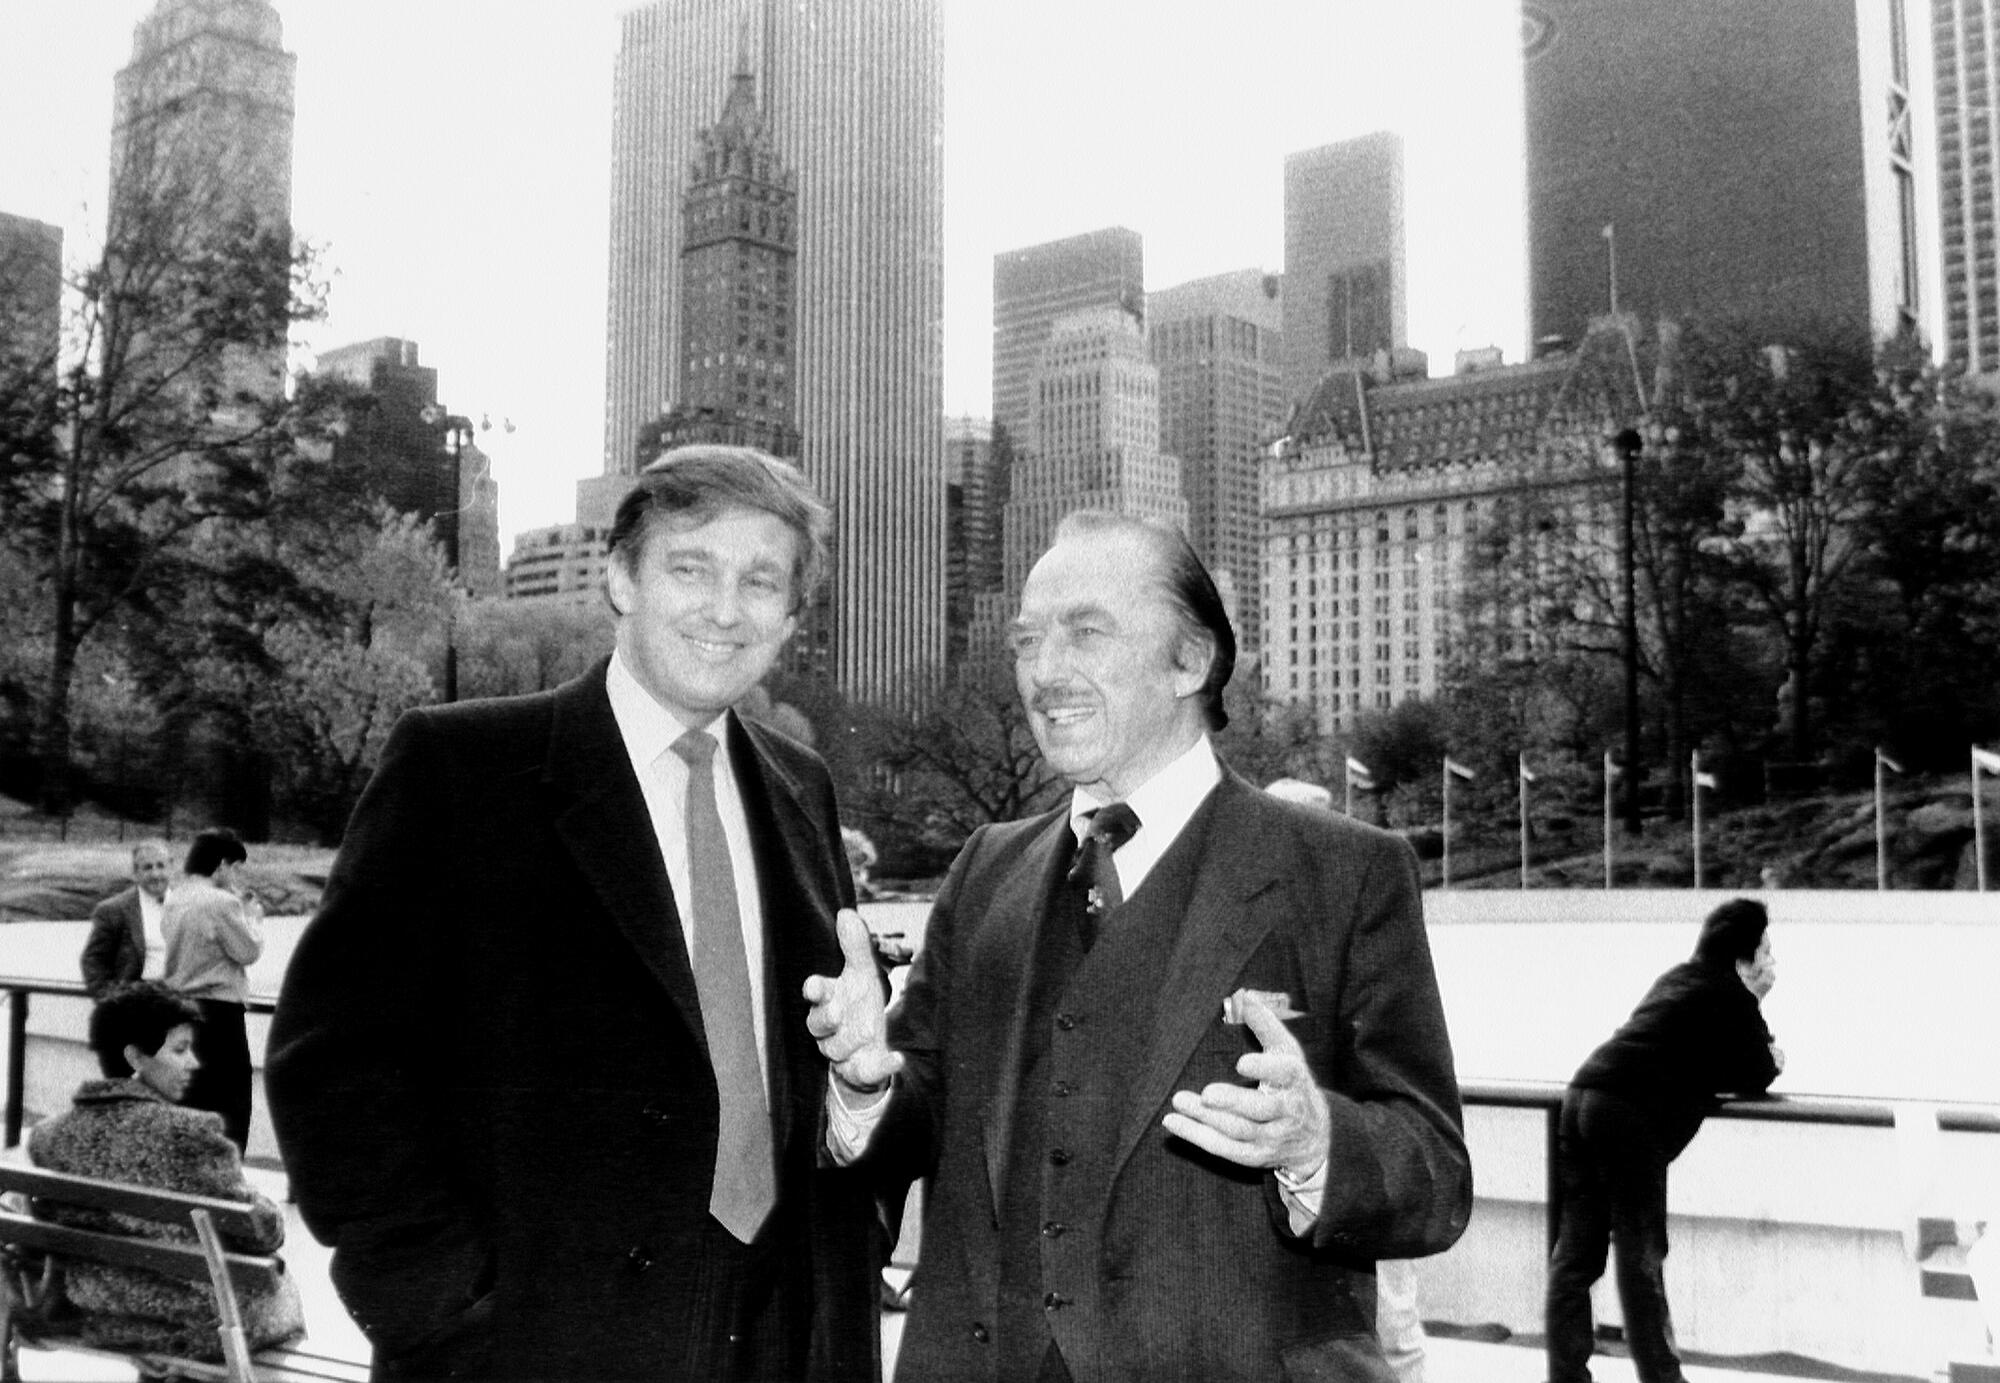 Two men in suits and ties, both smiling, with skyscrapers in the background